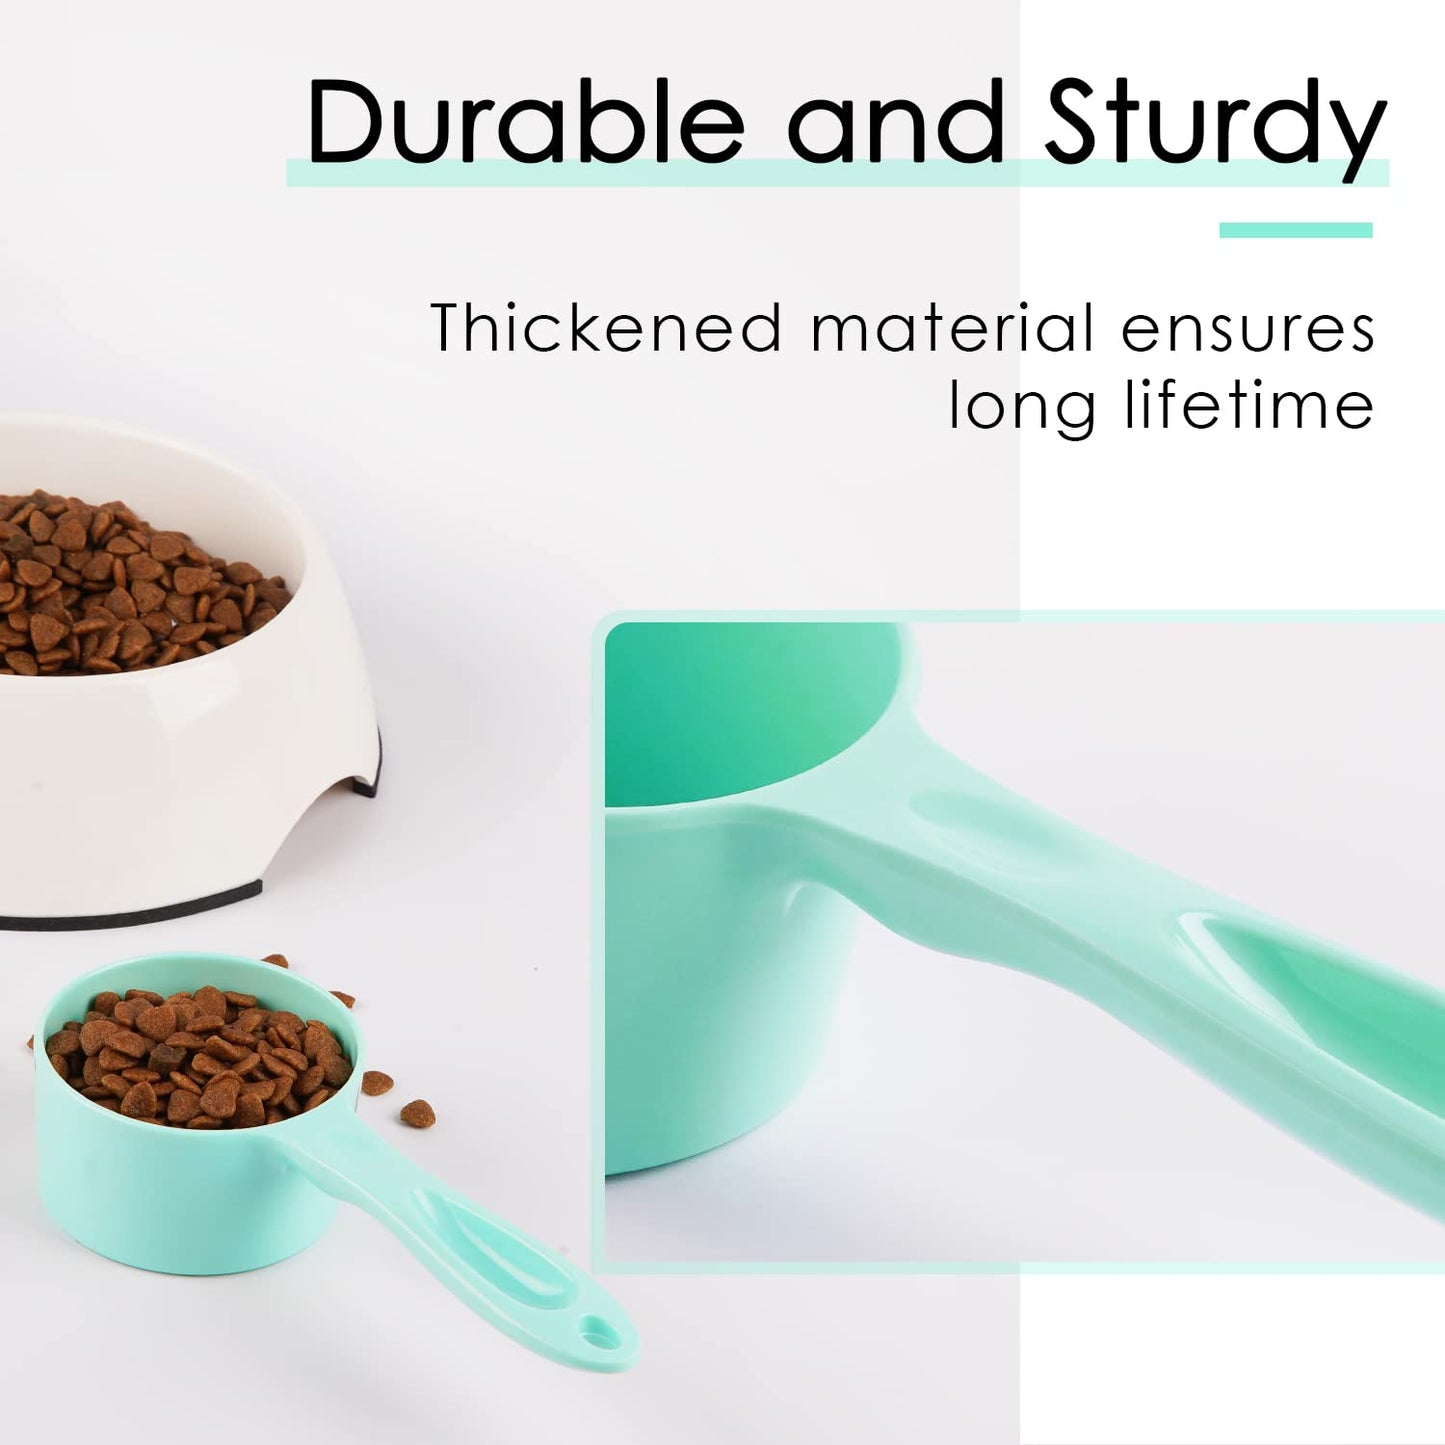 Super Design 1 Cup Dog Food Scoop for Container Melamine Measuring Scoop for Dogs Cats Birds and Rabbits Pet Food Feeding Scoop Dishwasher Safe - Baby Green